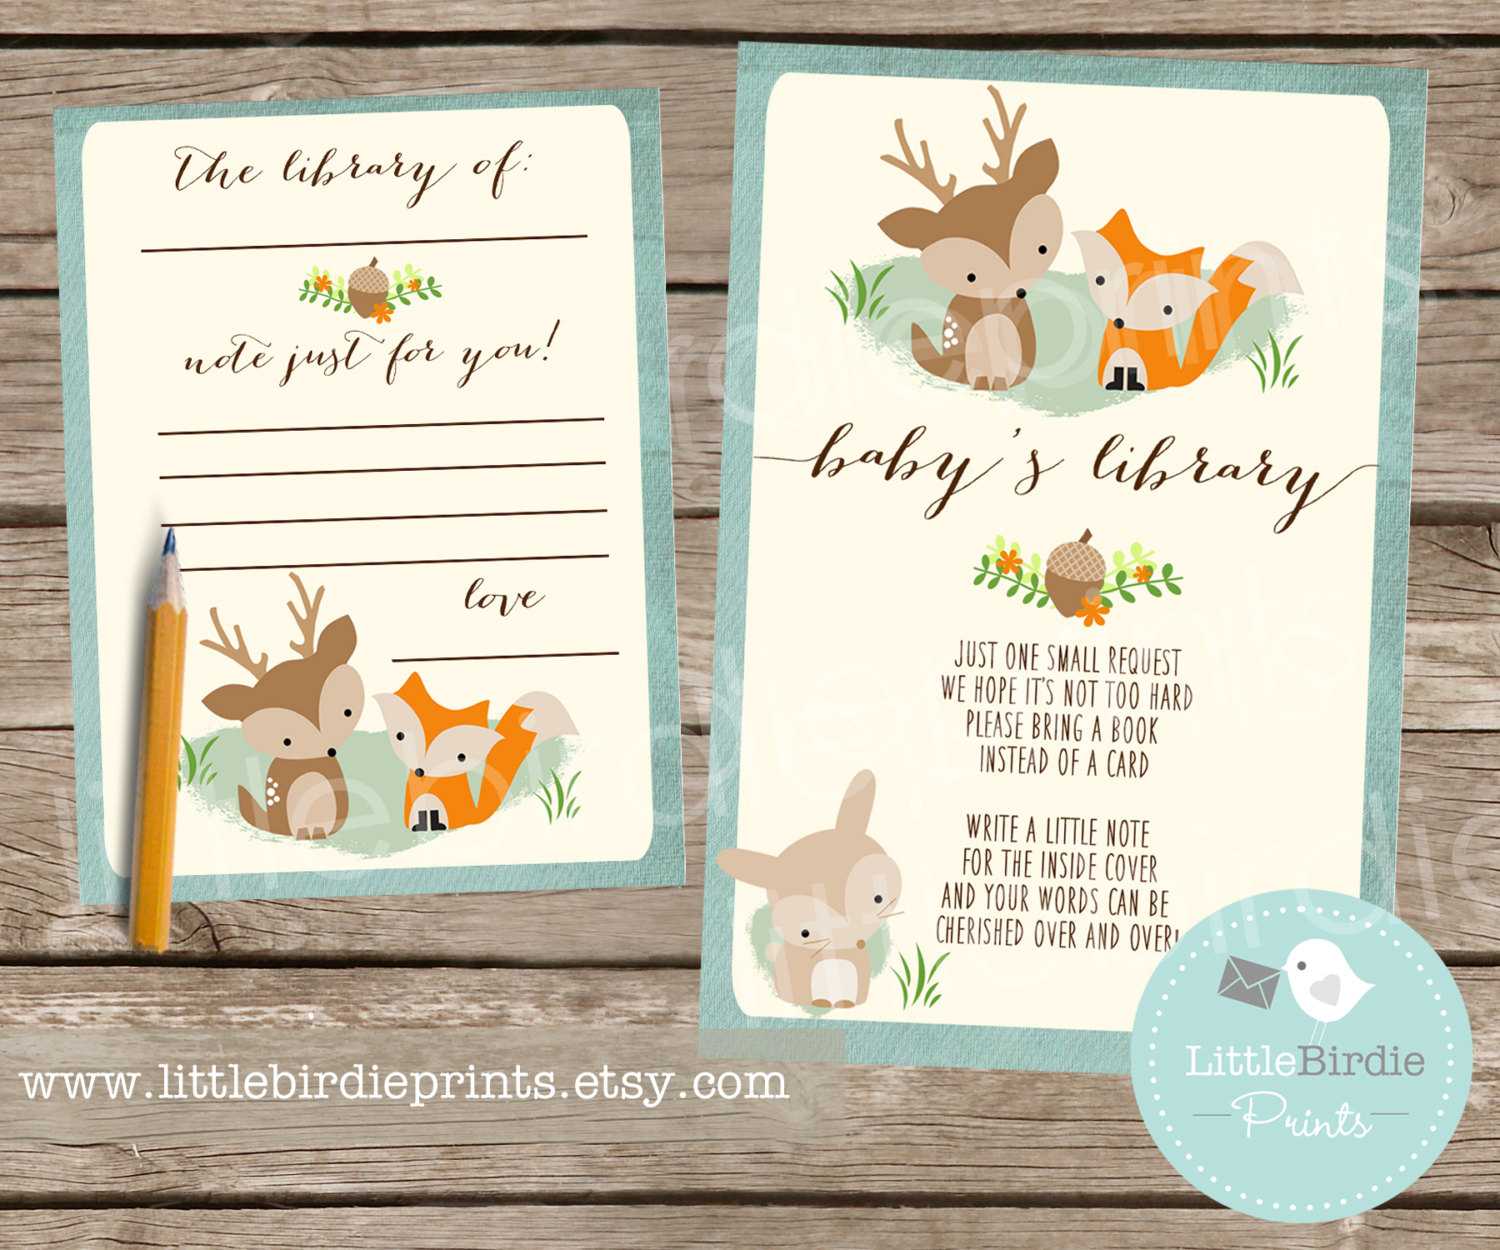 Woodland Baby Shower Book Instead Of A Card Inserts With Bookplate Template  Fox Deer Racoon Boy Rustic Invitation Available Instant Download With Regard To Bookplate Templates For Word